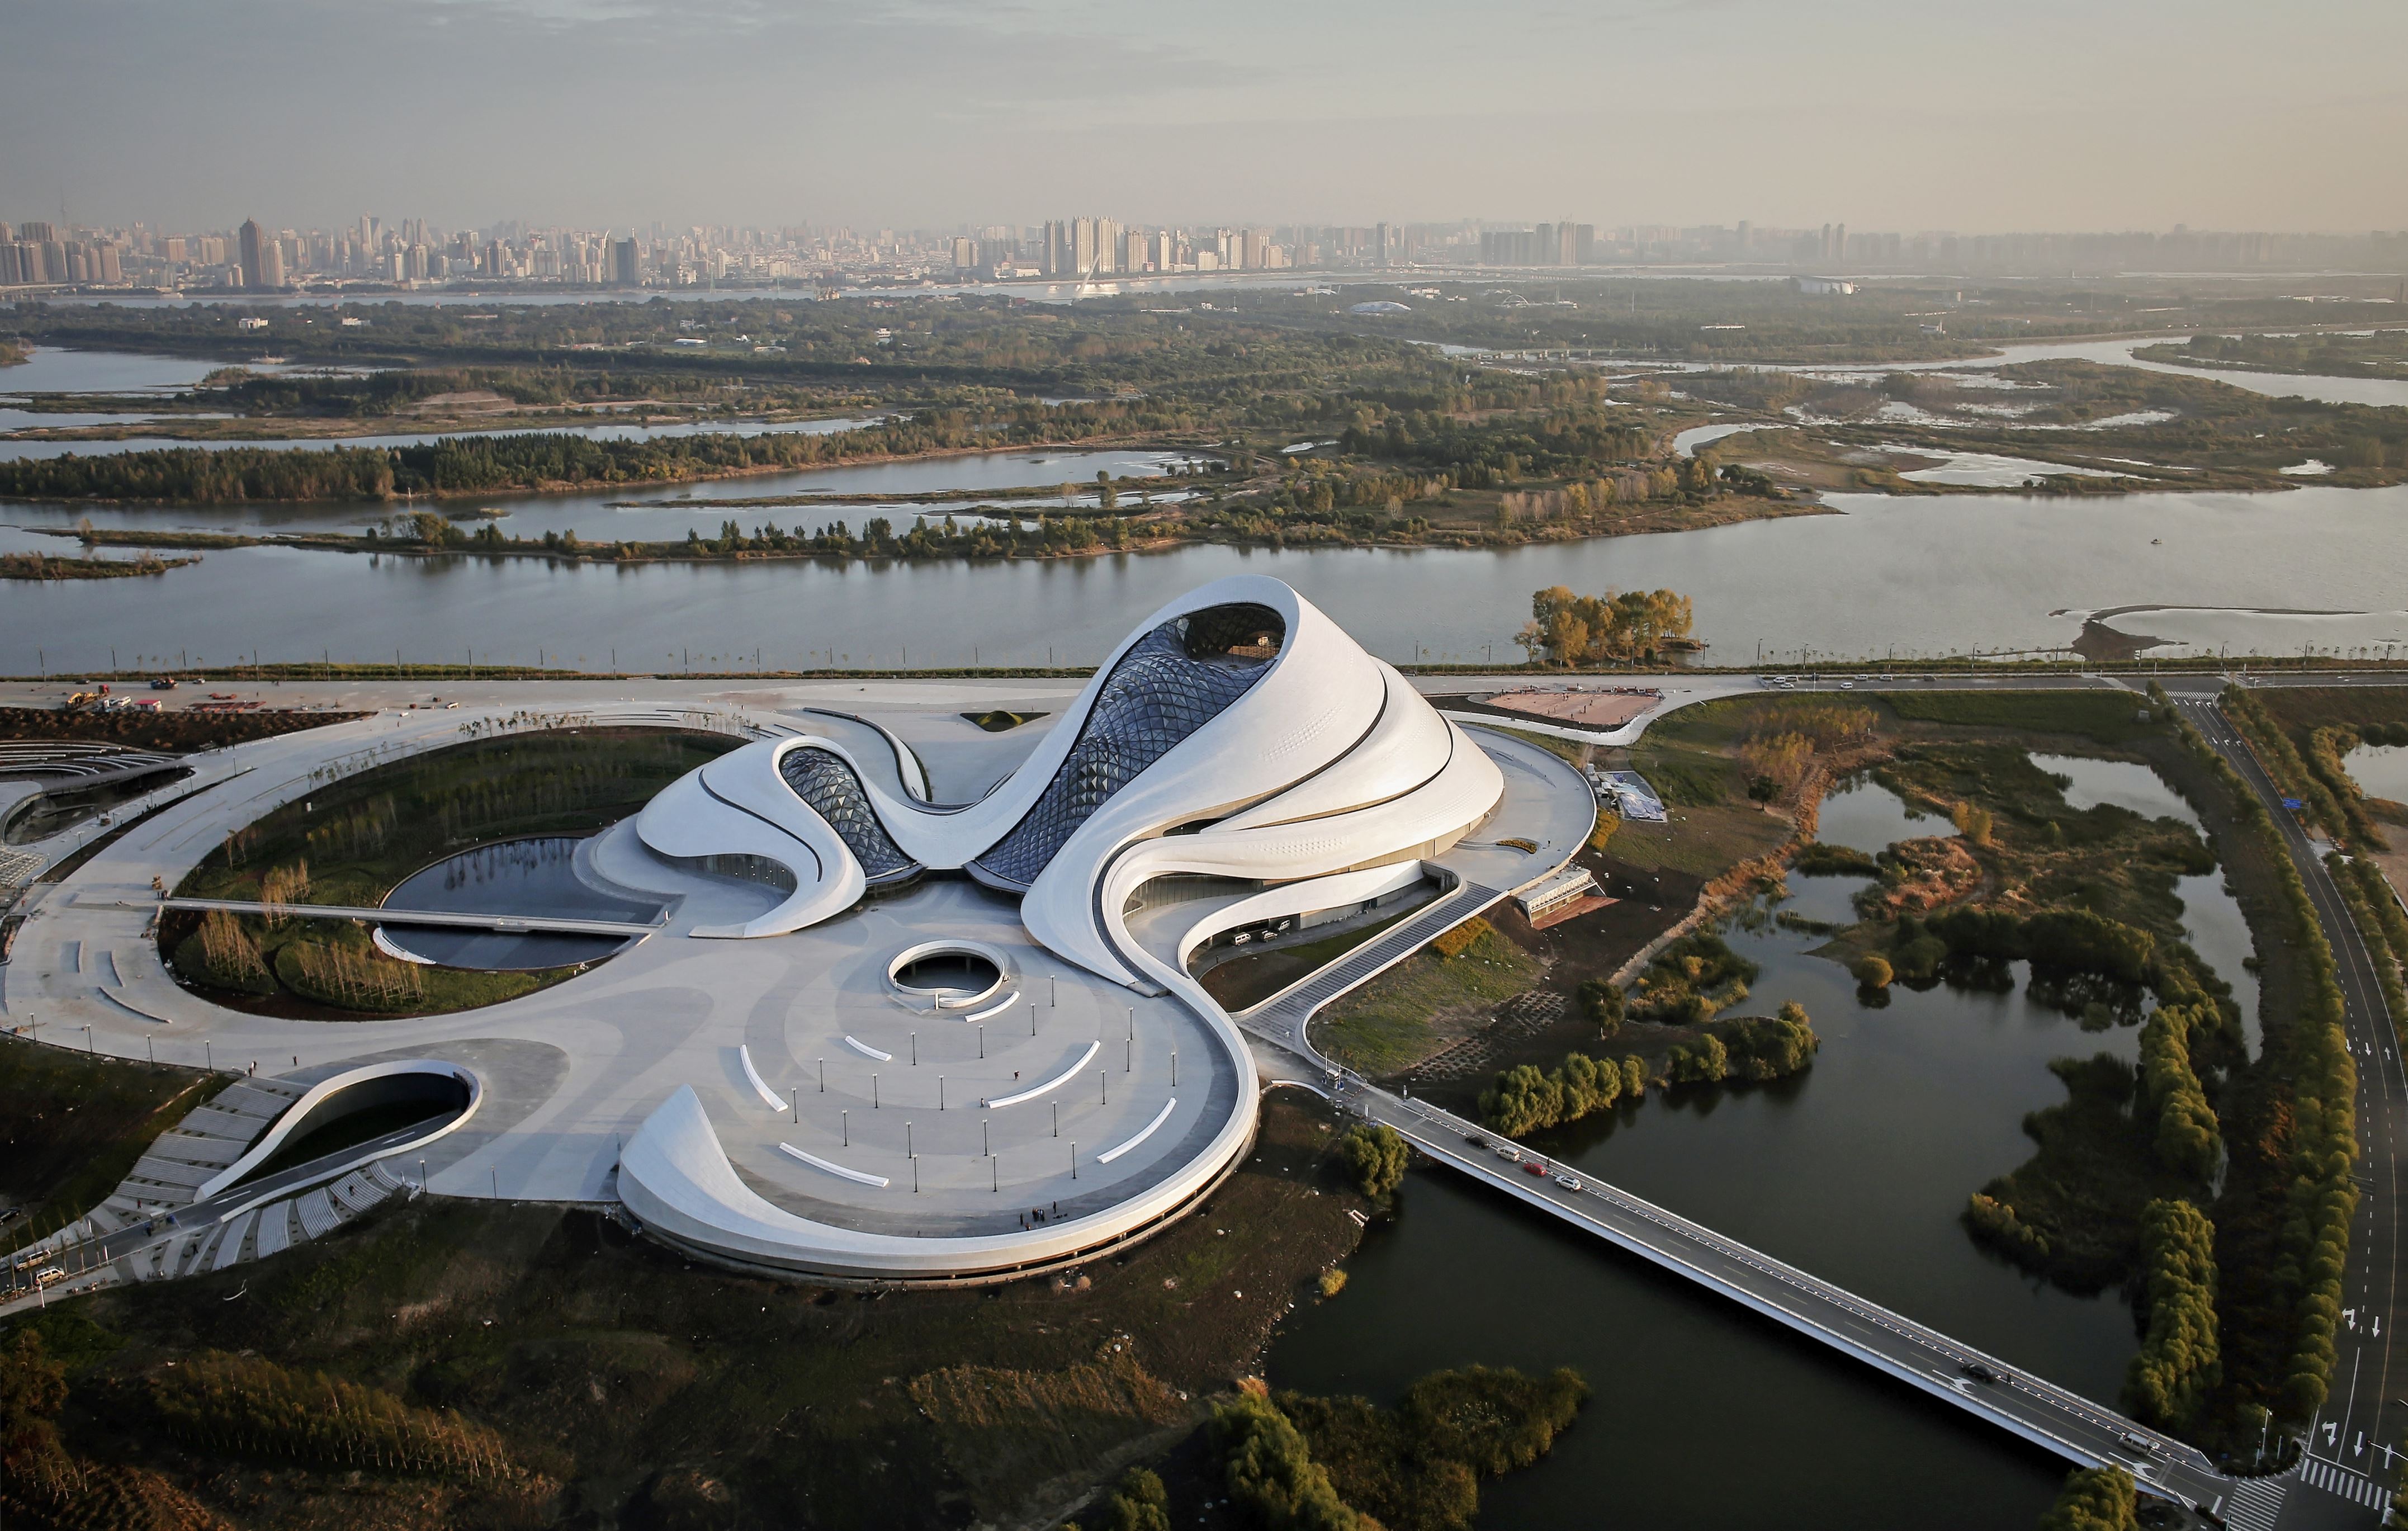 Slide 56 of 57: Aerial View Of Opera House Embedded In Harbin's Wetland Landscape With City Skyline In Background. Harbin Opera House, Harbin, China. Architect: Mad Architects, 2015.